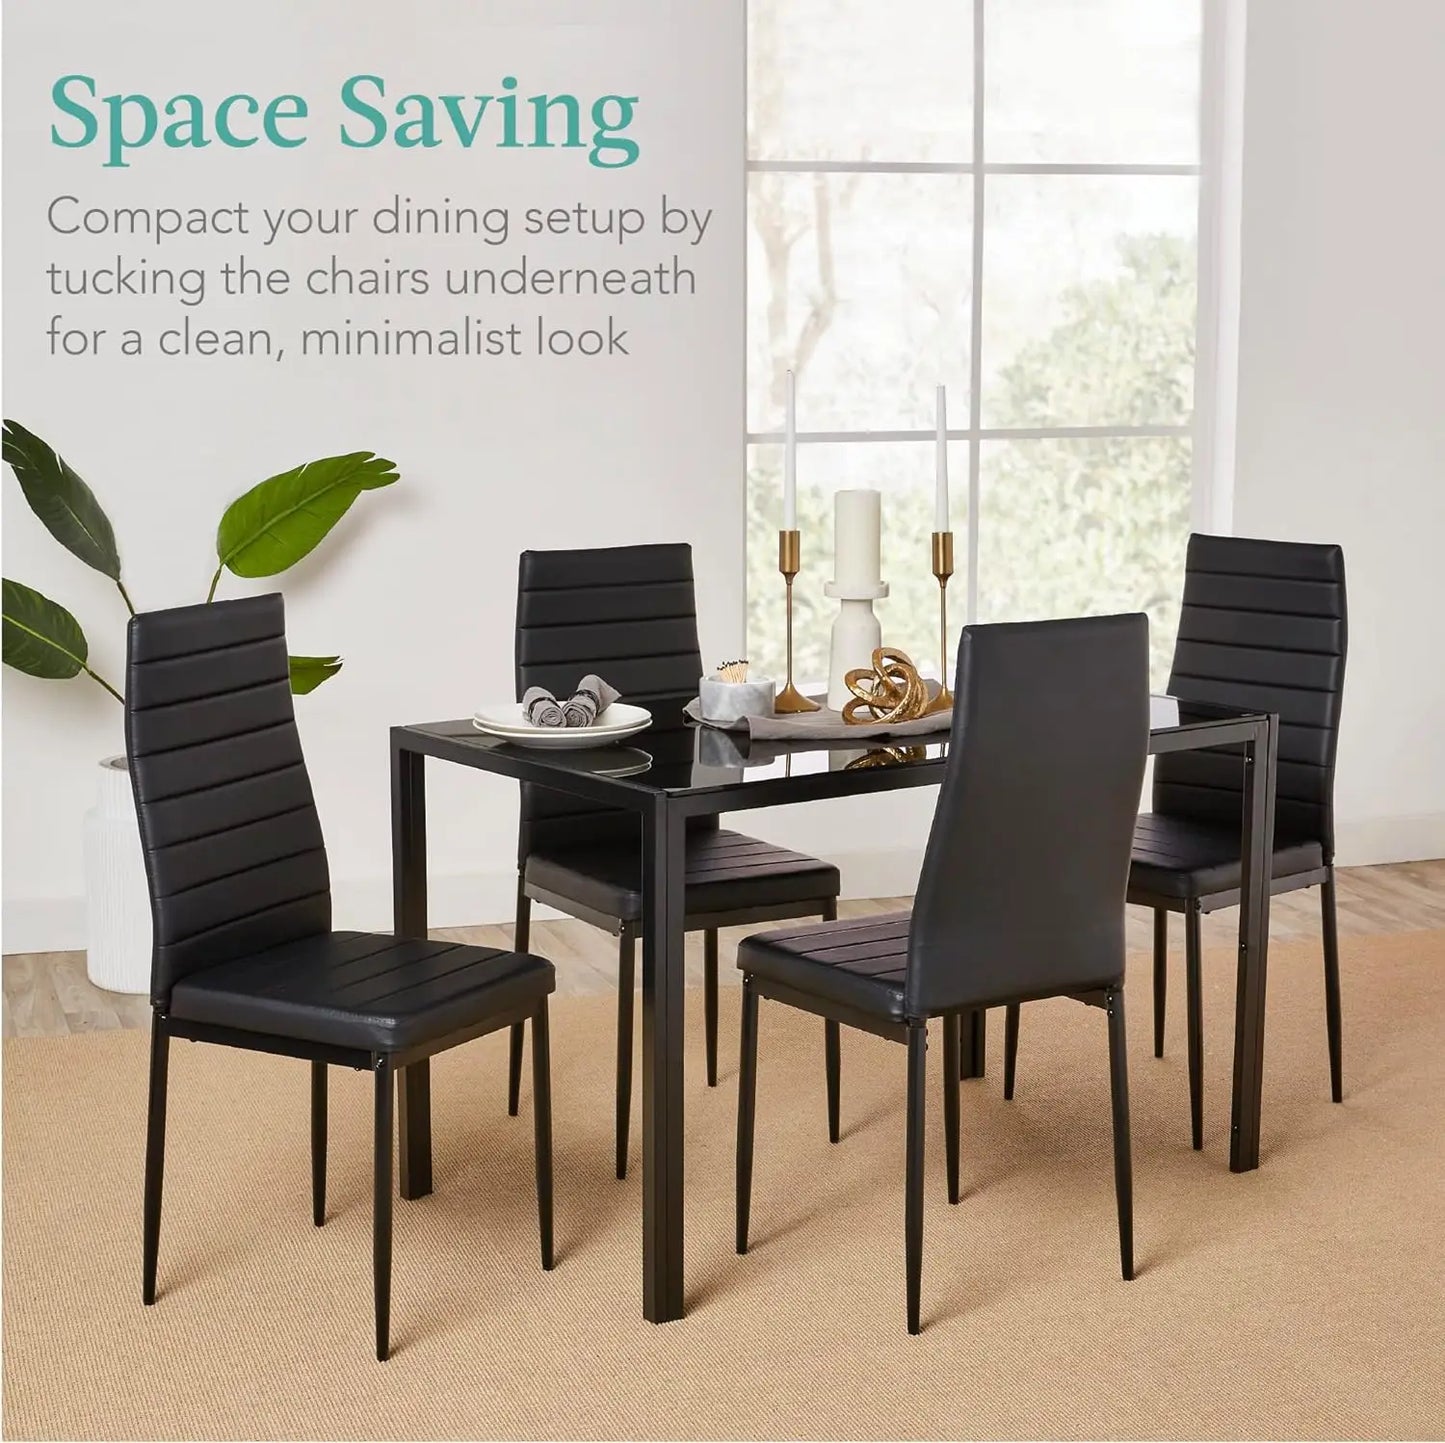 5-Piece Glass Dining Set,Modern Kitchen Table Space-Saving w/Glass Tabletop,4 Upholstered PU Chairs,Metal Steel Frame.multicolor